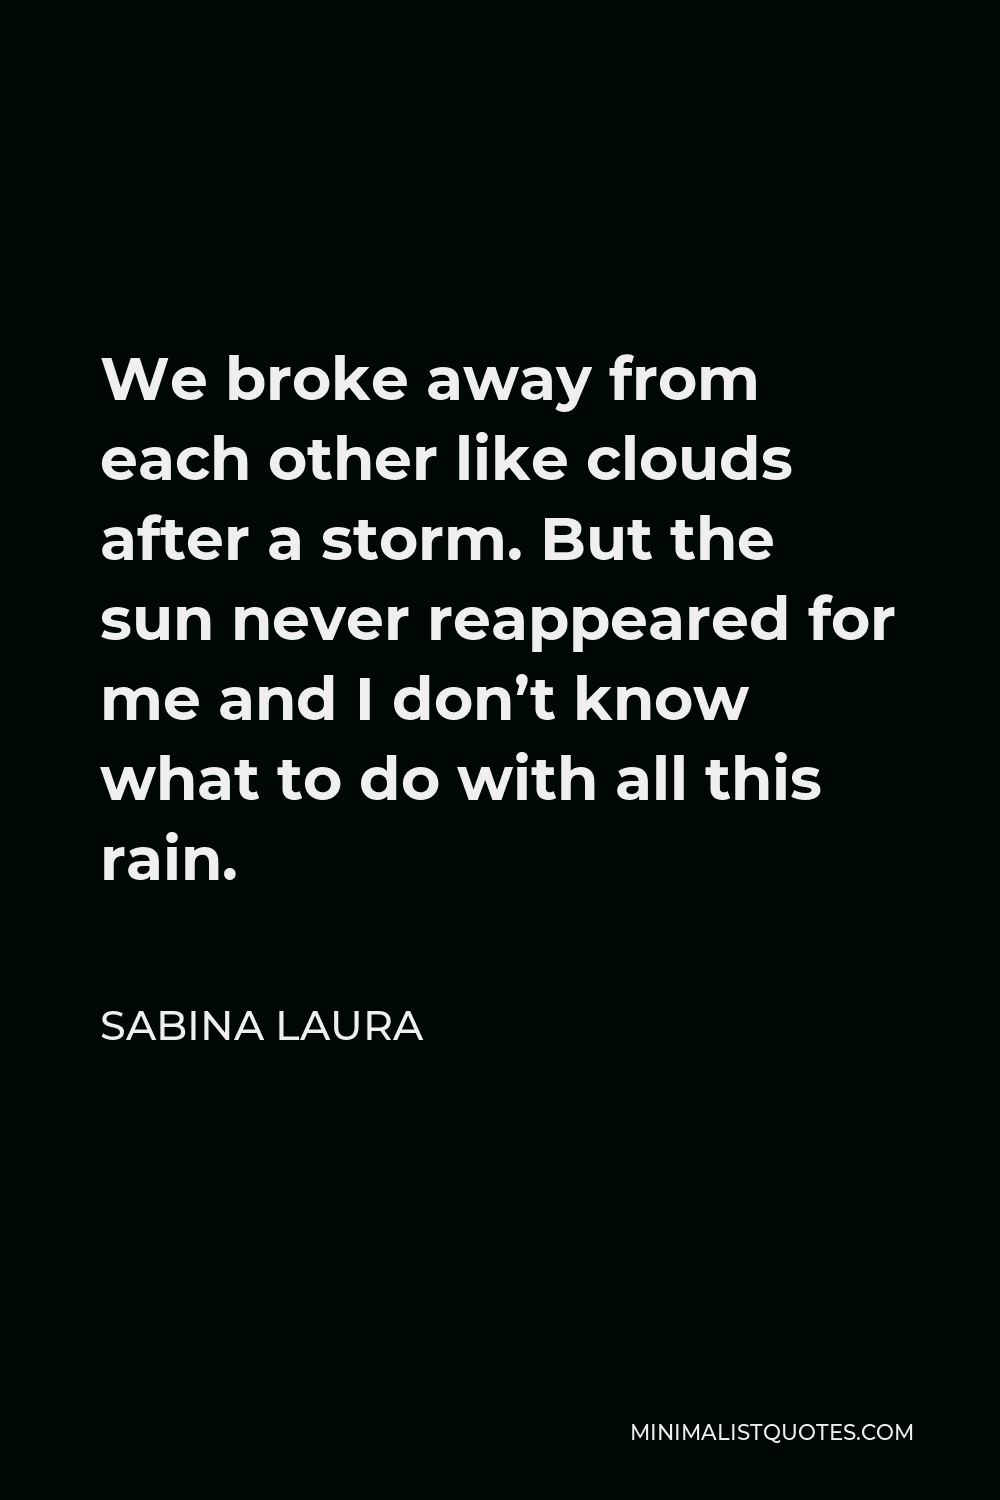 Sabina Laura Quote - We broke away from each other like clouds after a storm. But the sun never reappeared for me and I don’t know what to do with all this rain.